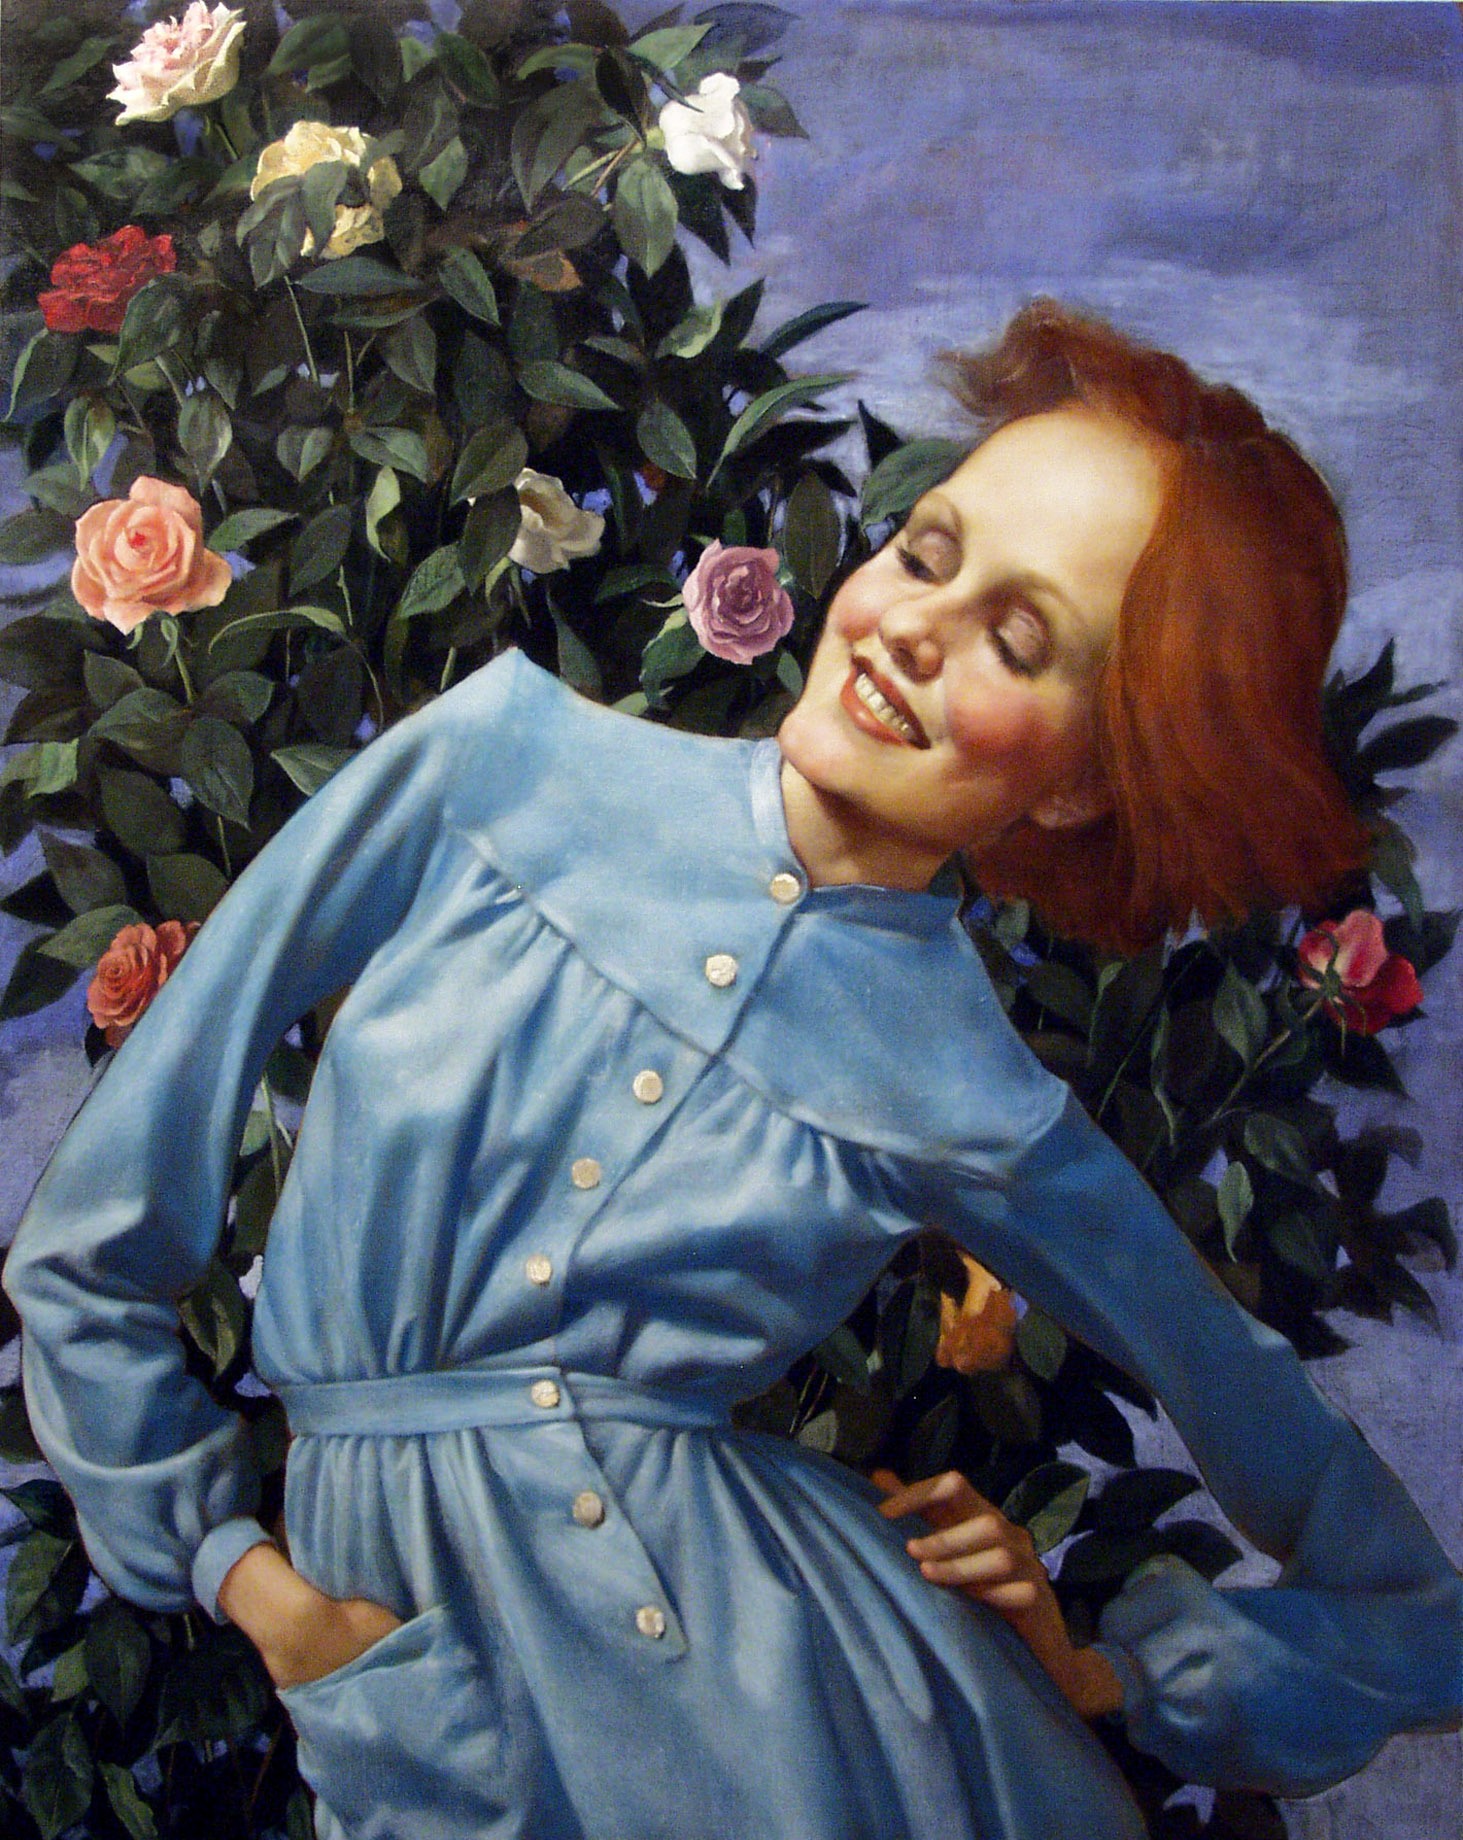 Bent Lady, 2003. Oil on canvas. 48 x 38 inches. Courtesy Lindon Gallery. © John Currin. Image courtesy Gagosian Gallery and Sadie Coles HQ.